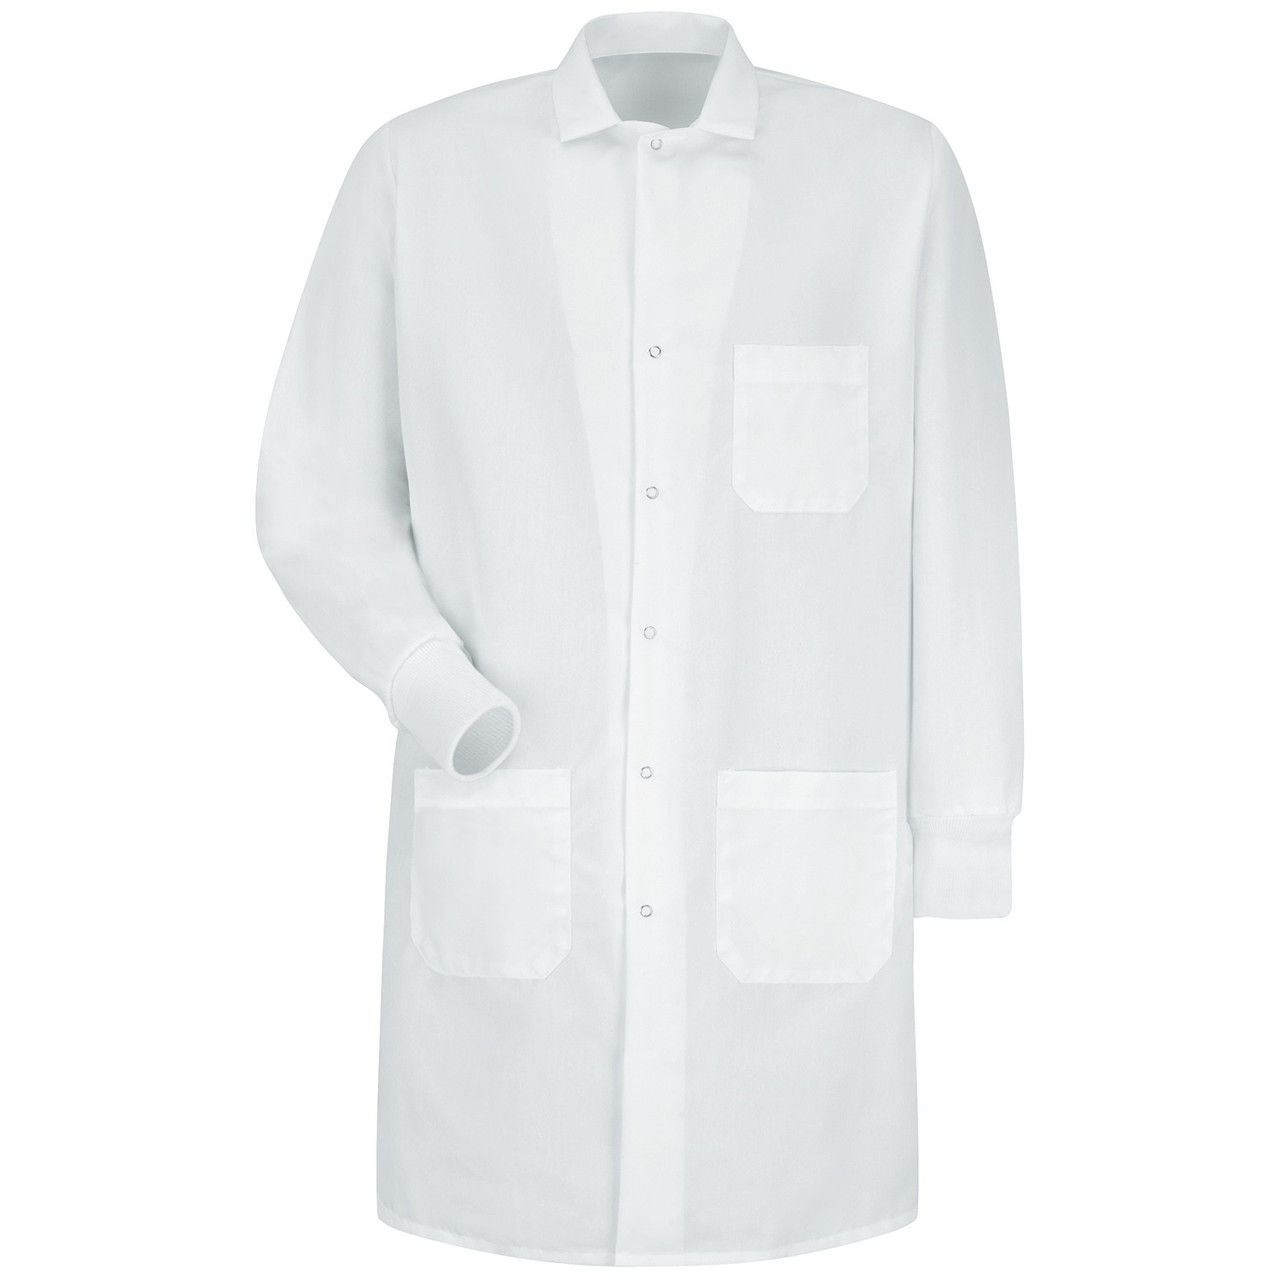 How should I care for my red kap lab coats before purchasing?